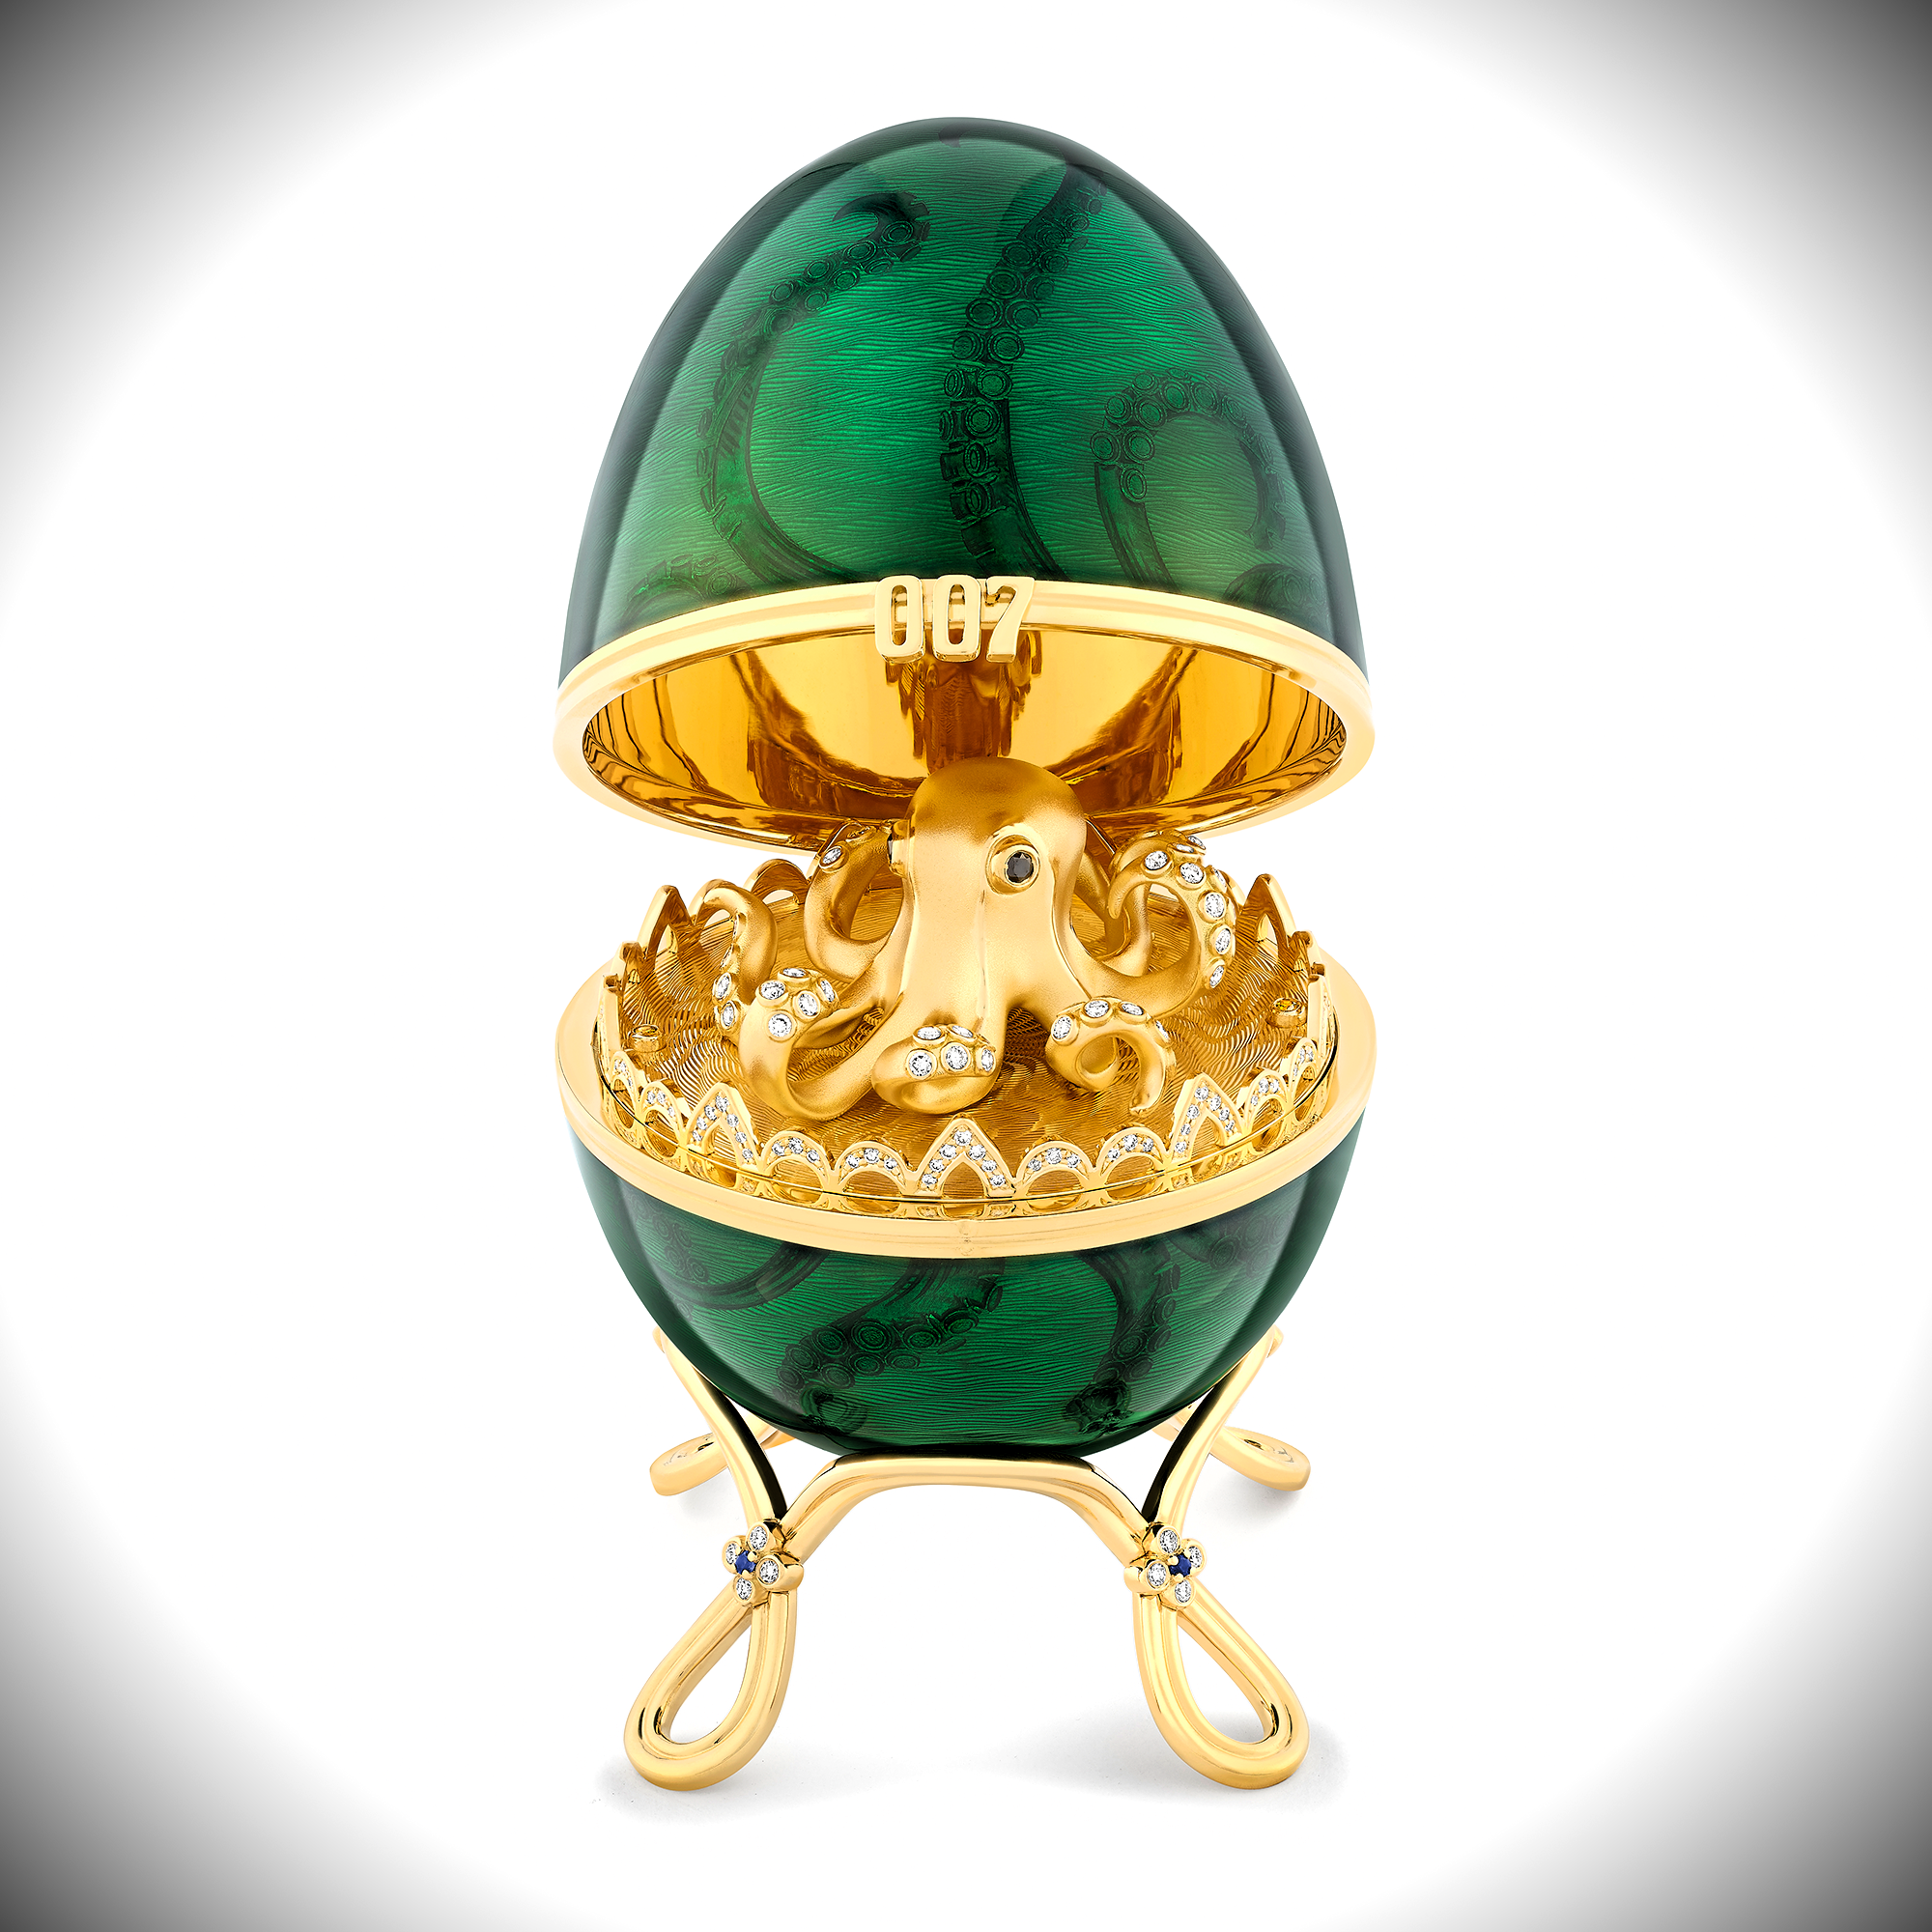 Fabergé x 007 Octopussy Egg Objet - Numbered Edition